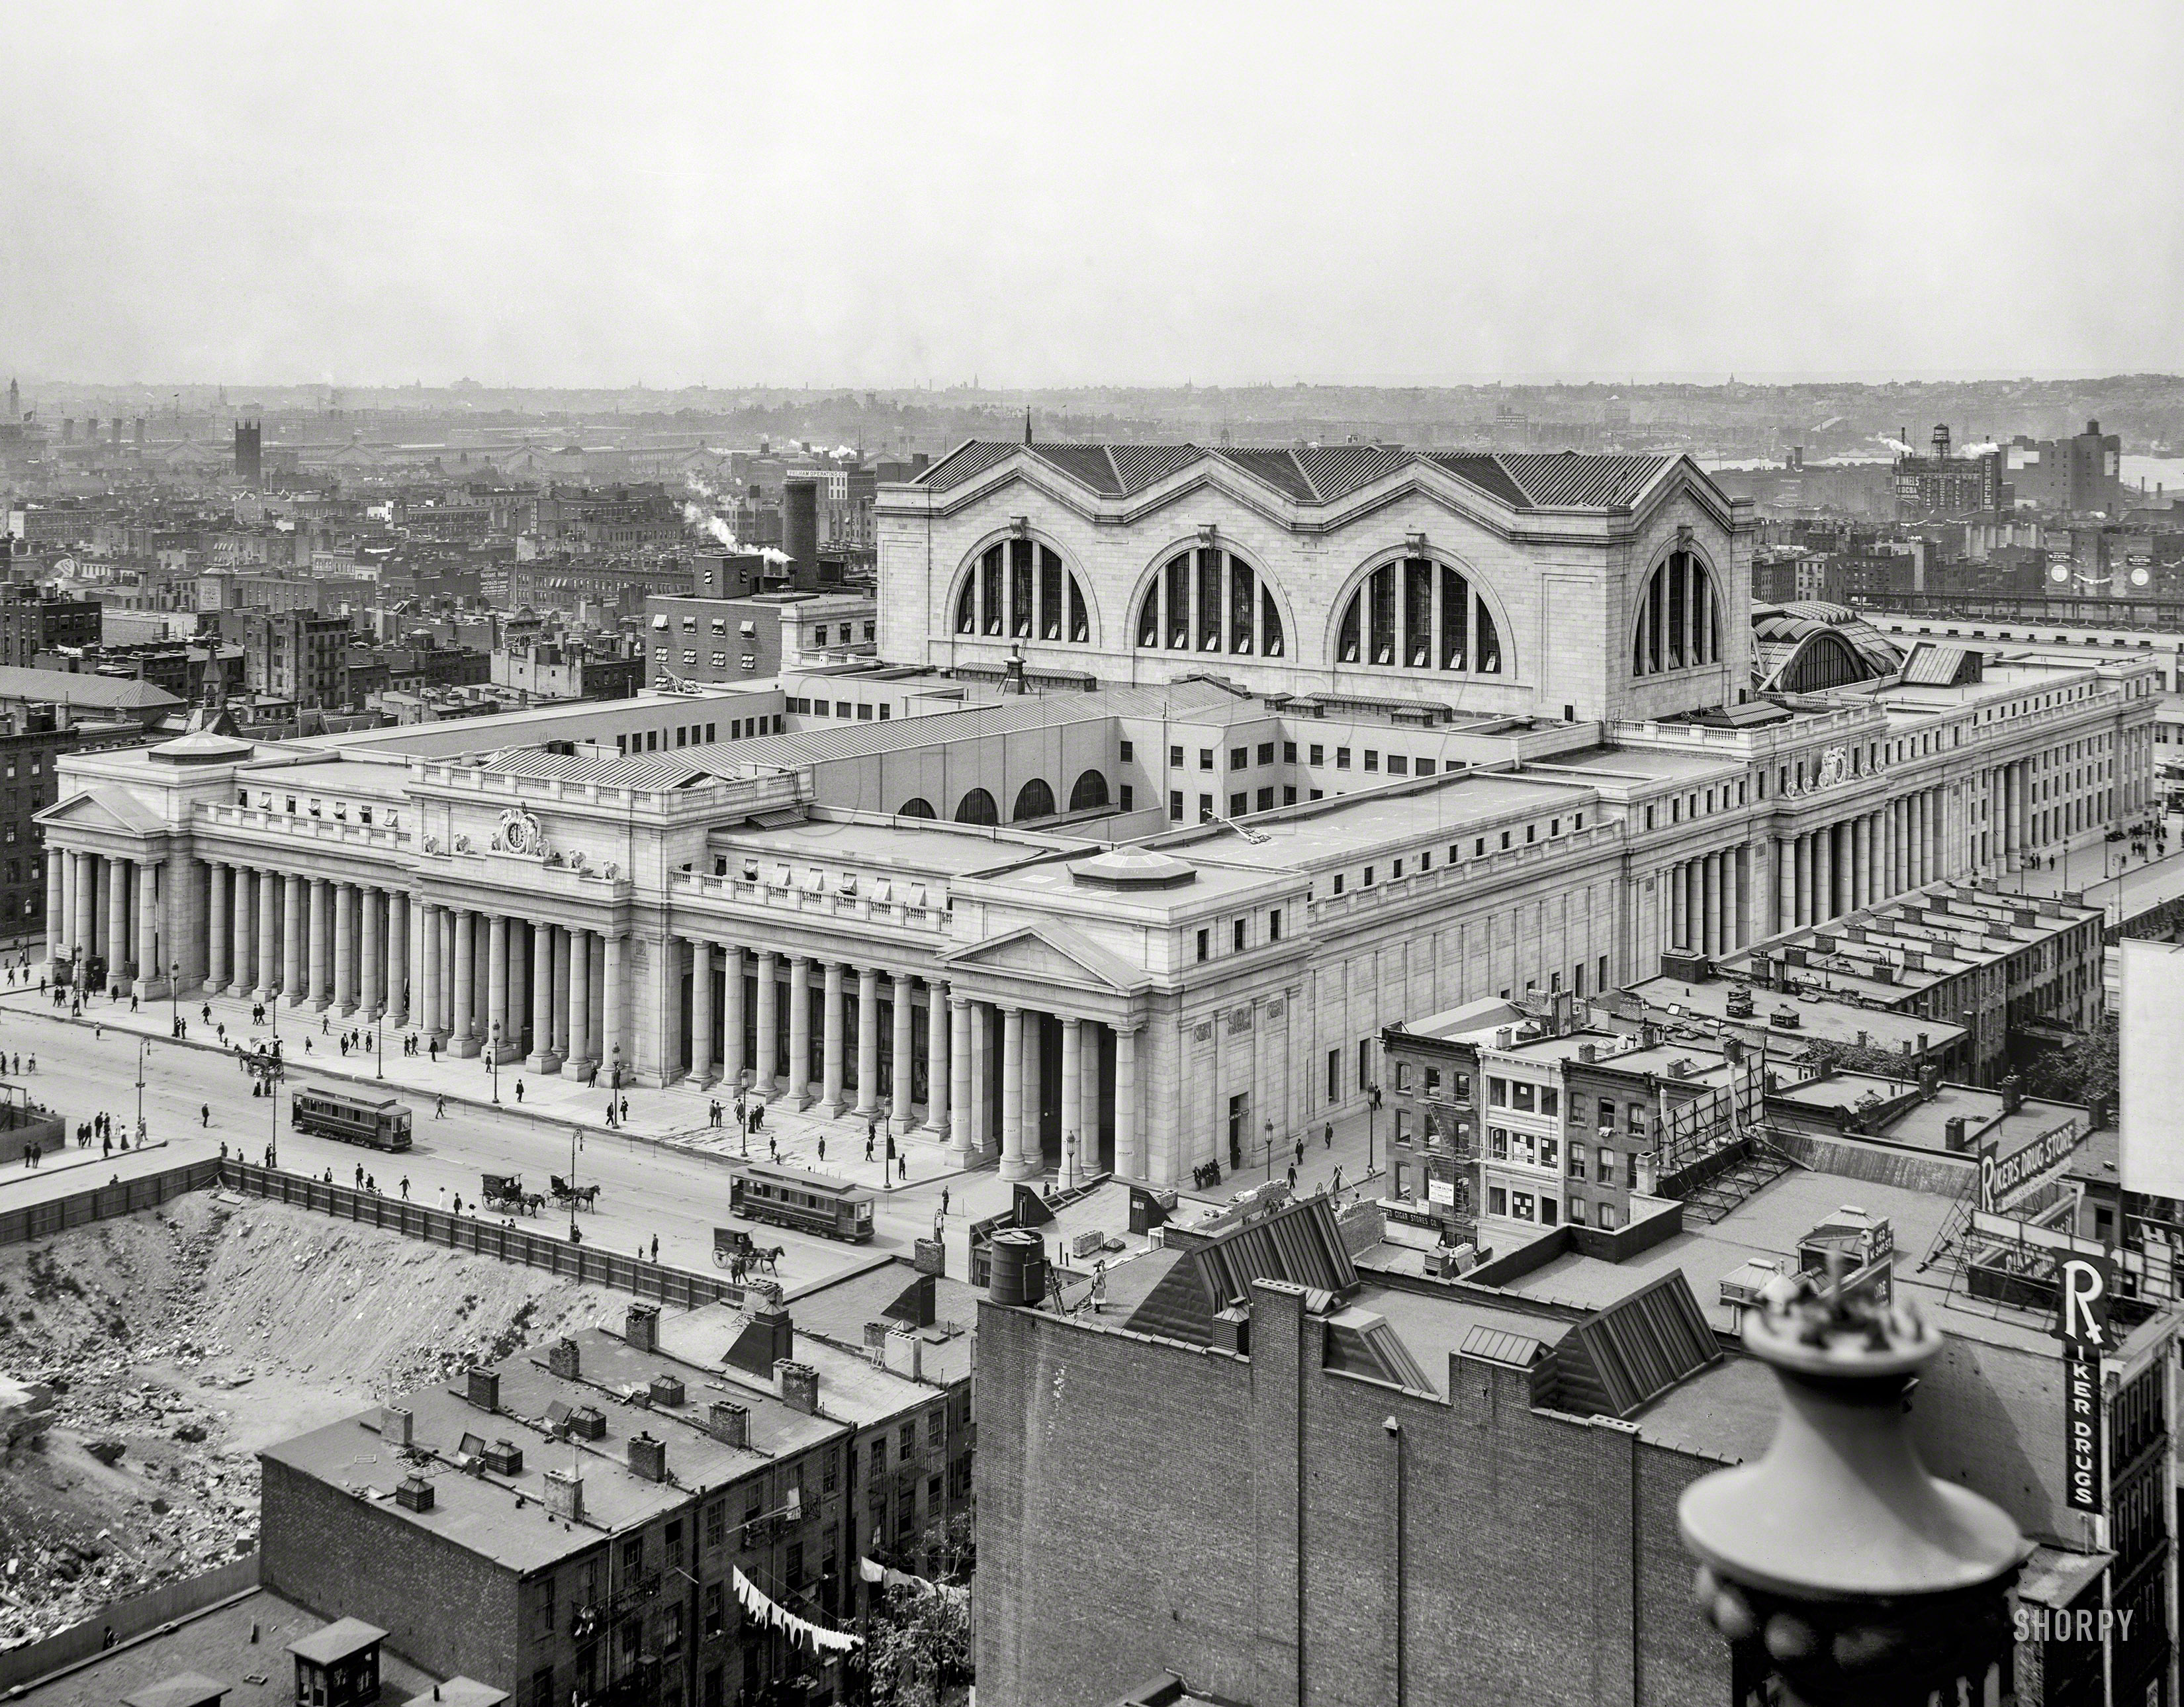 Circa 1910. "Bird's-eye view of Penn Station, New York City." Also a bird's-eye view of someone's underwear and diapers. 8x10 inch glass negative. View full size.